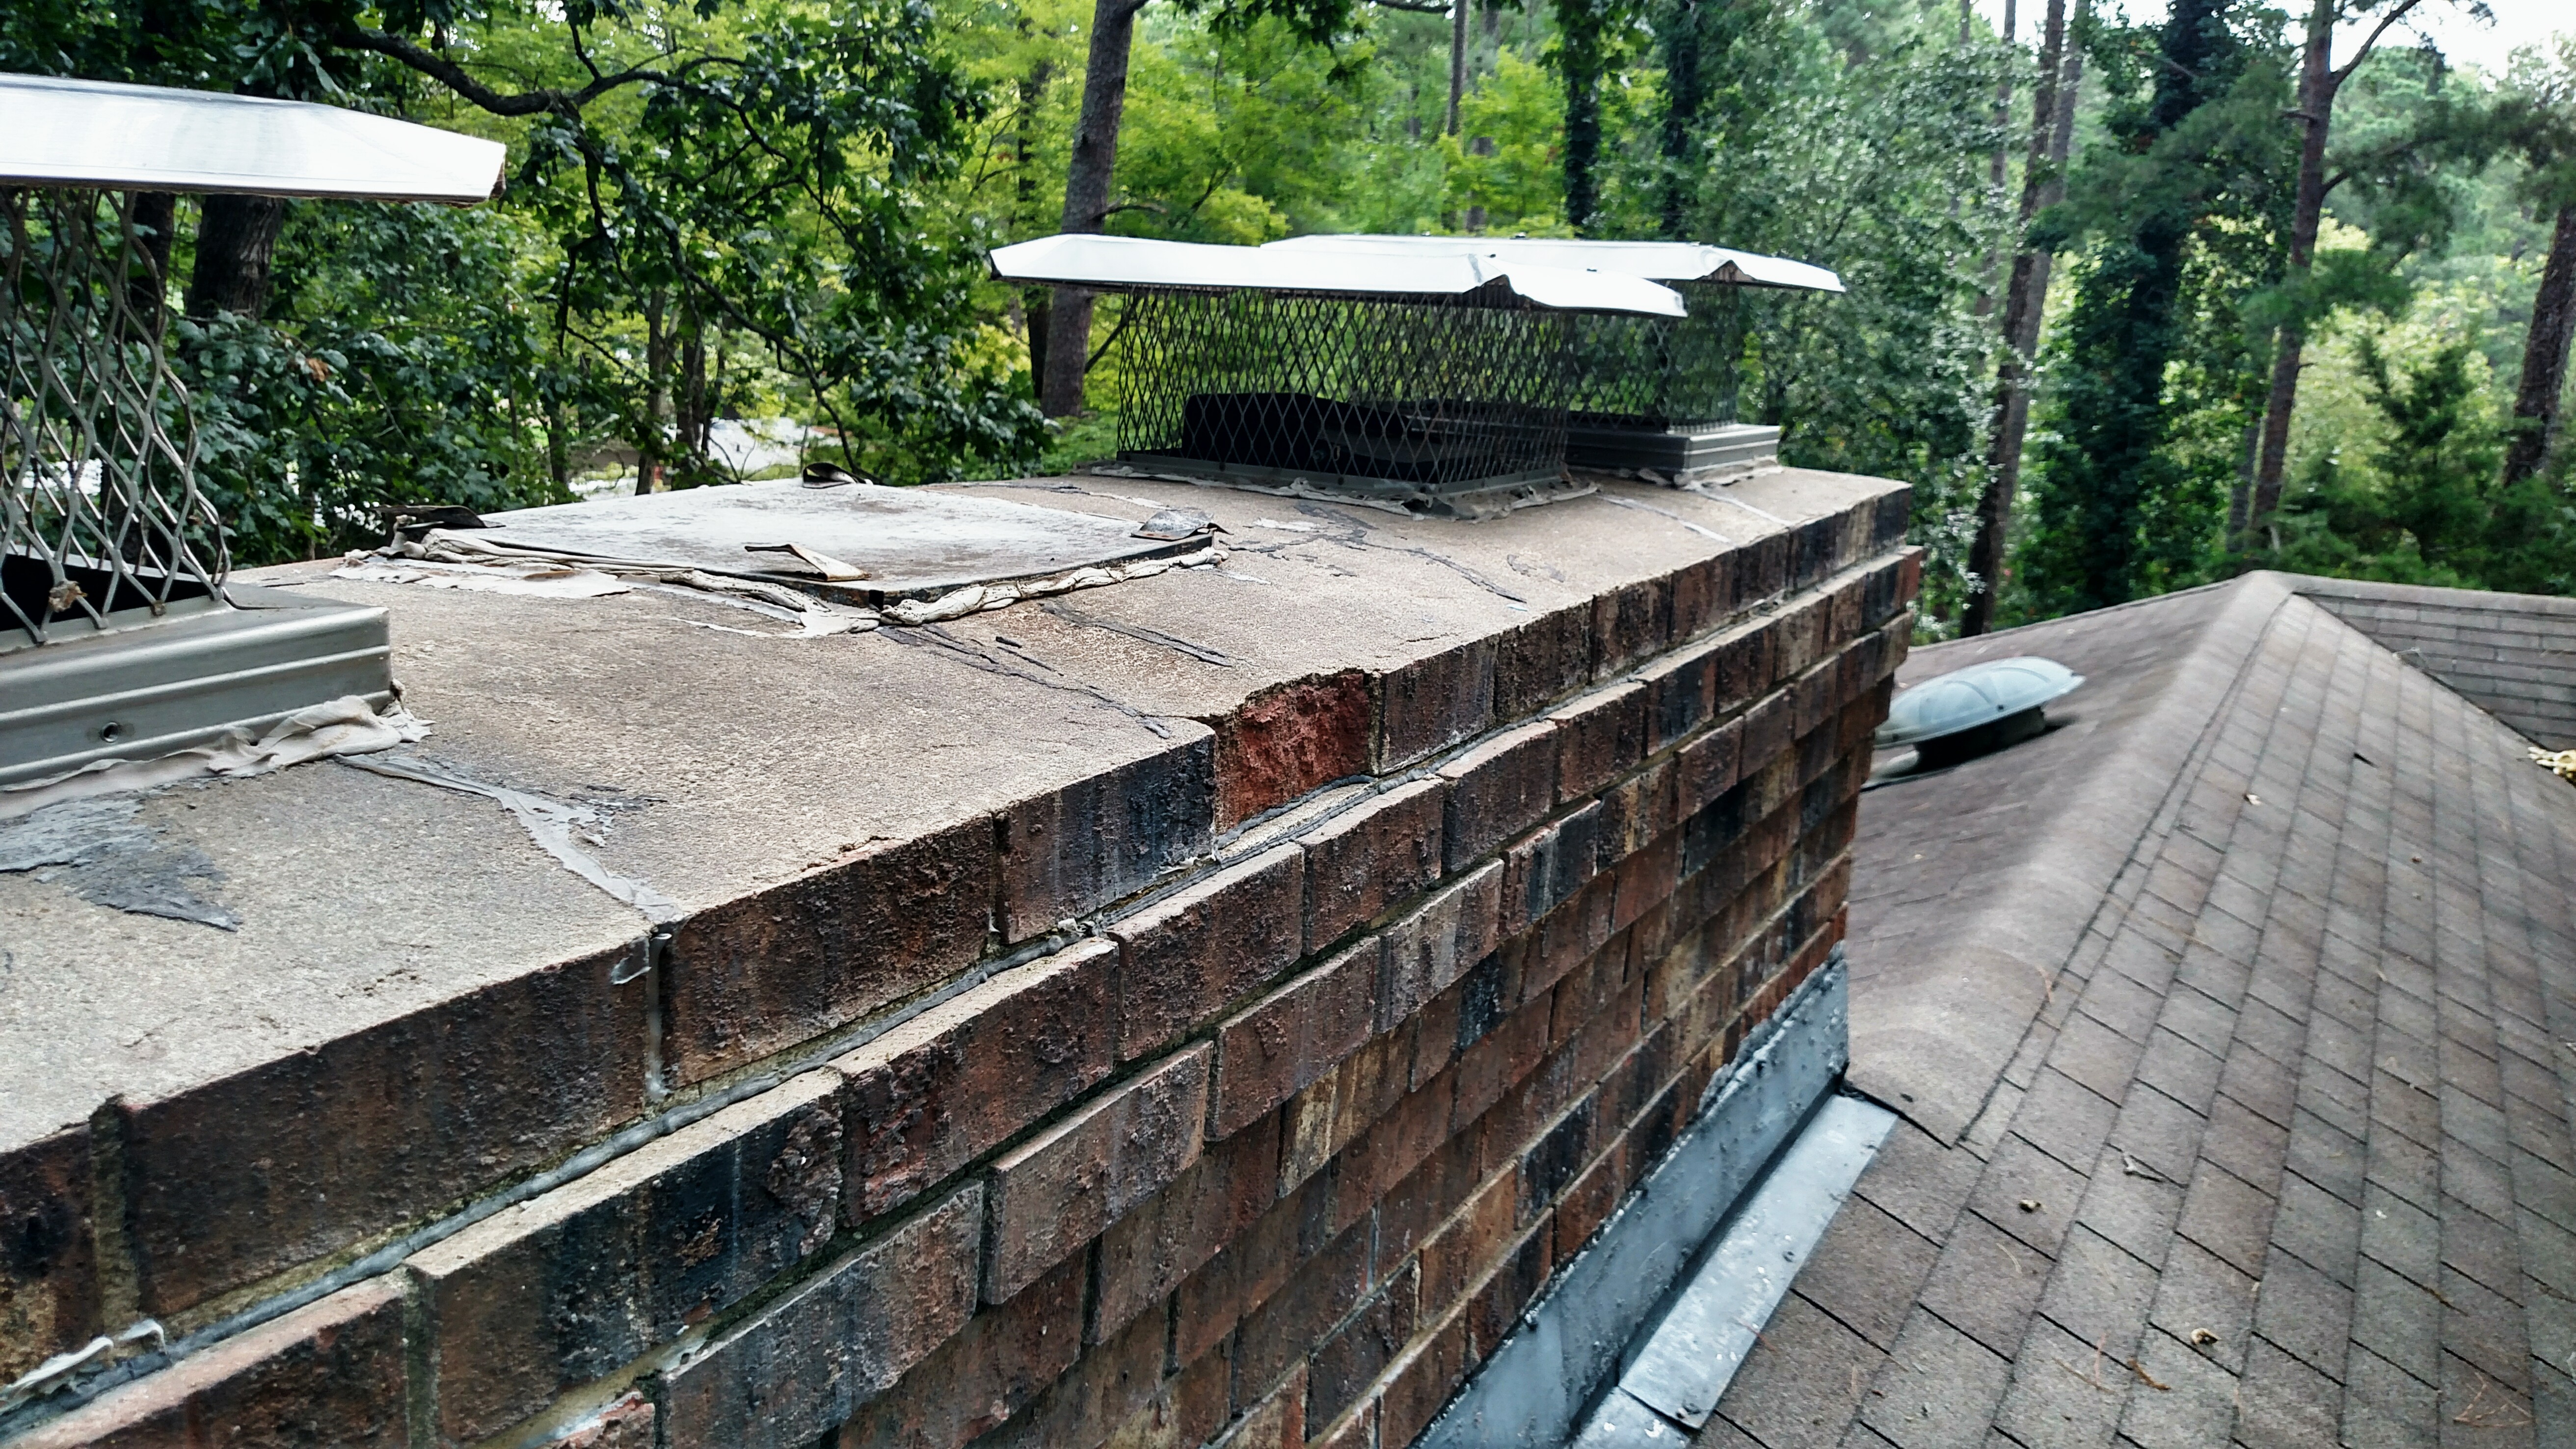 Spalling brick chimney with three crowns can cause leaks woods in background